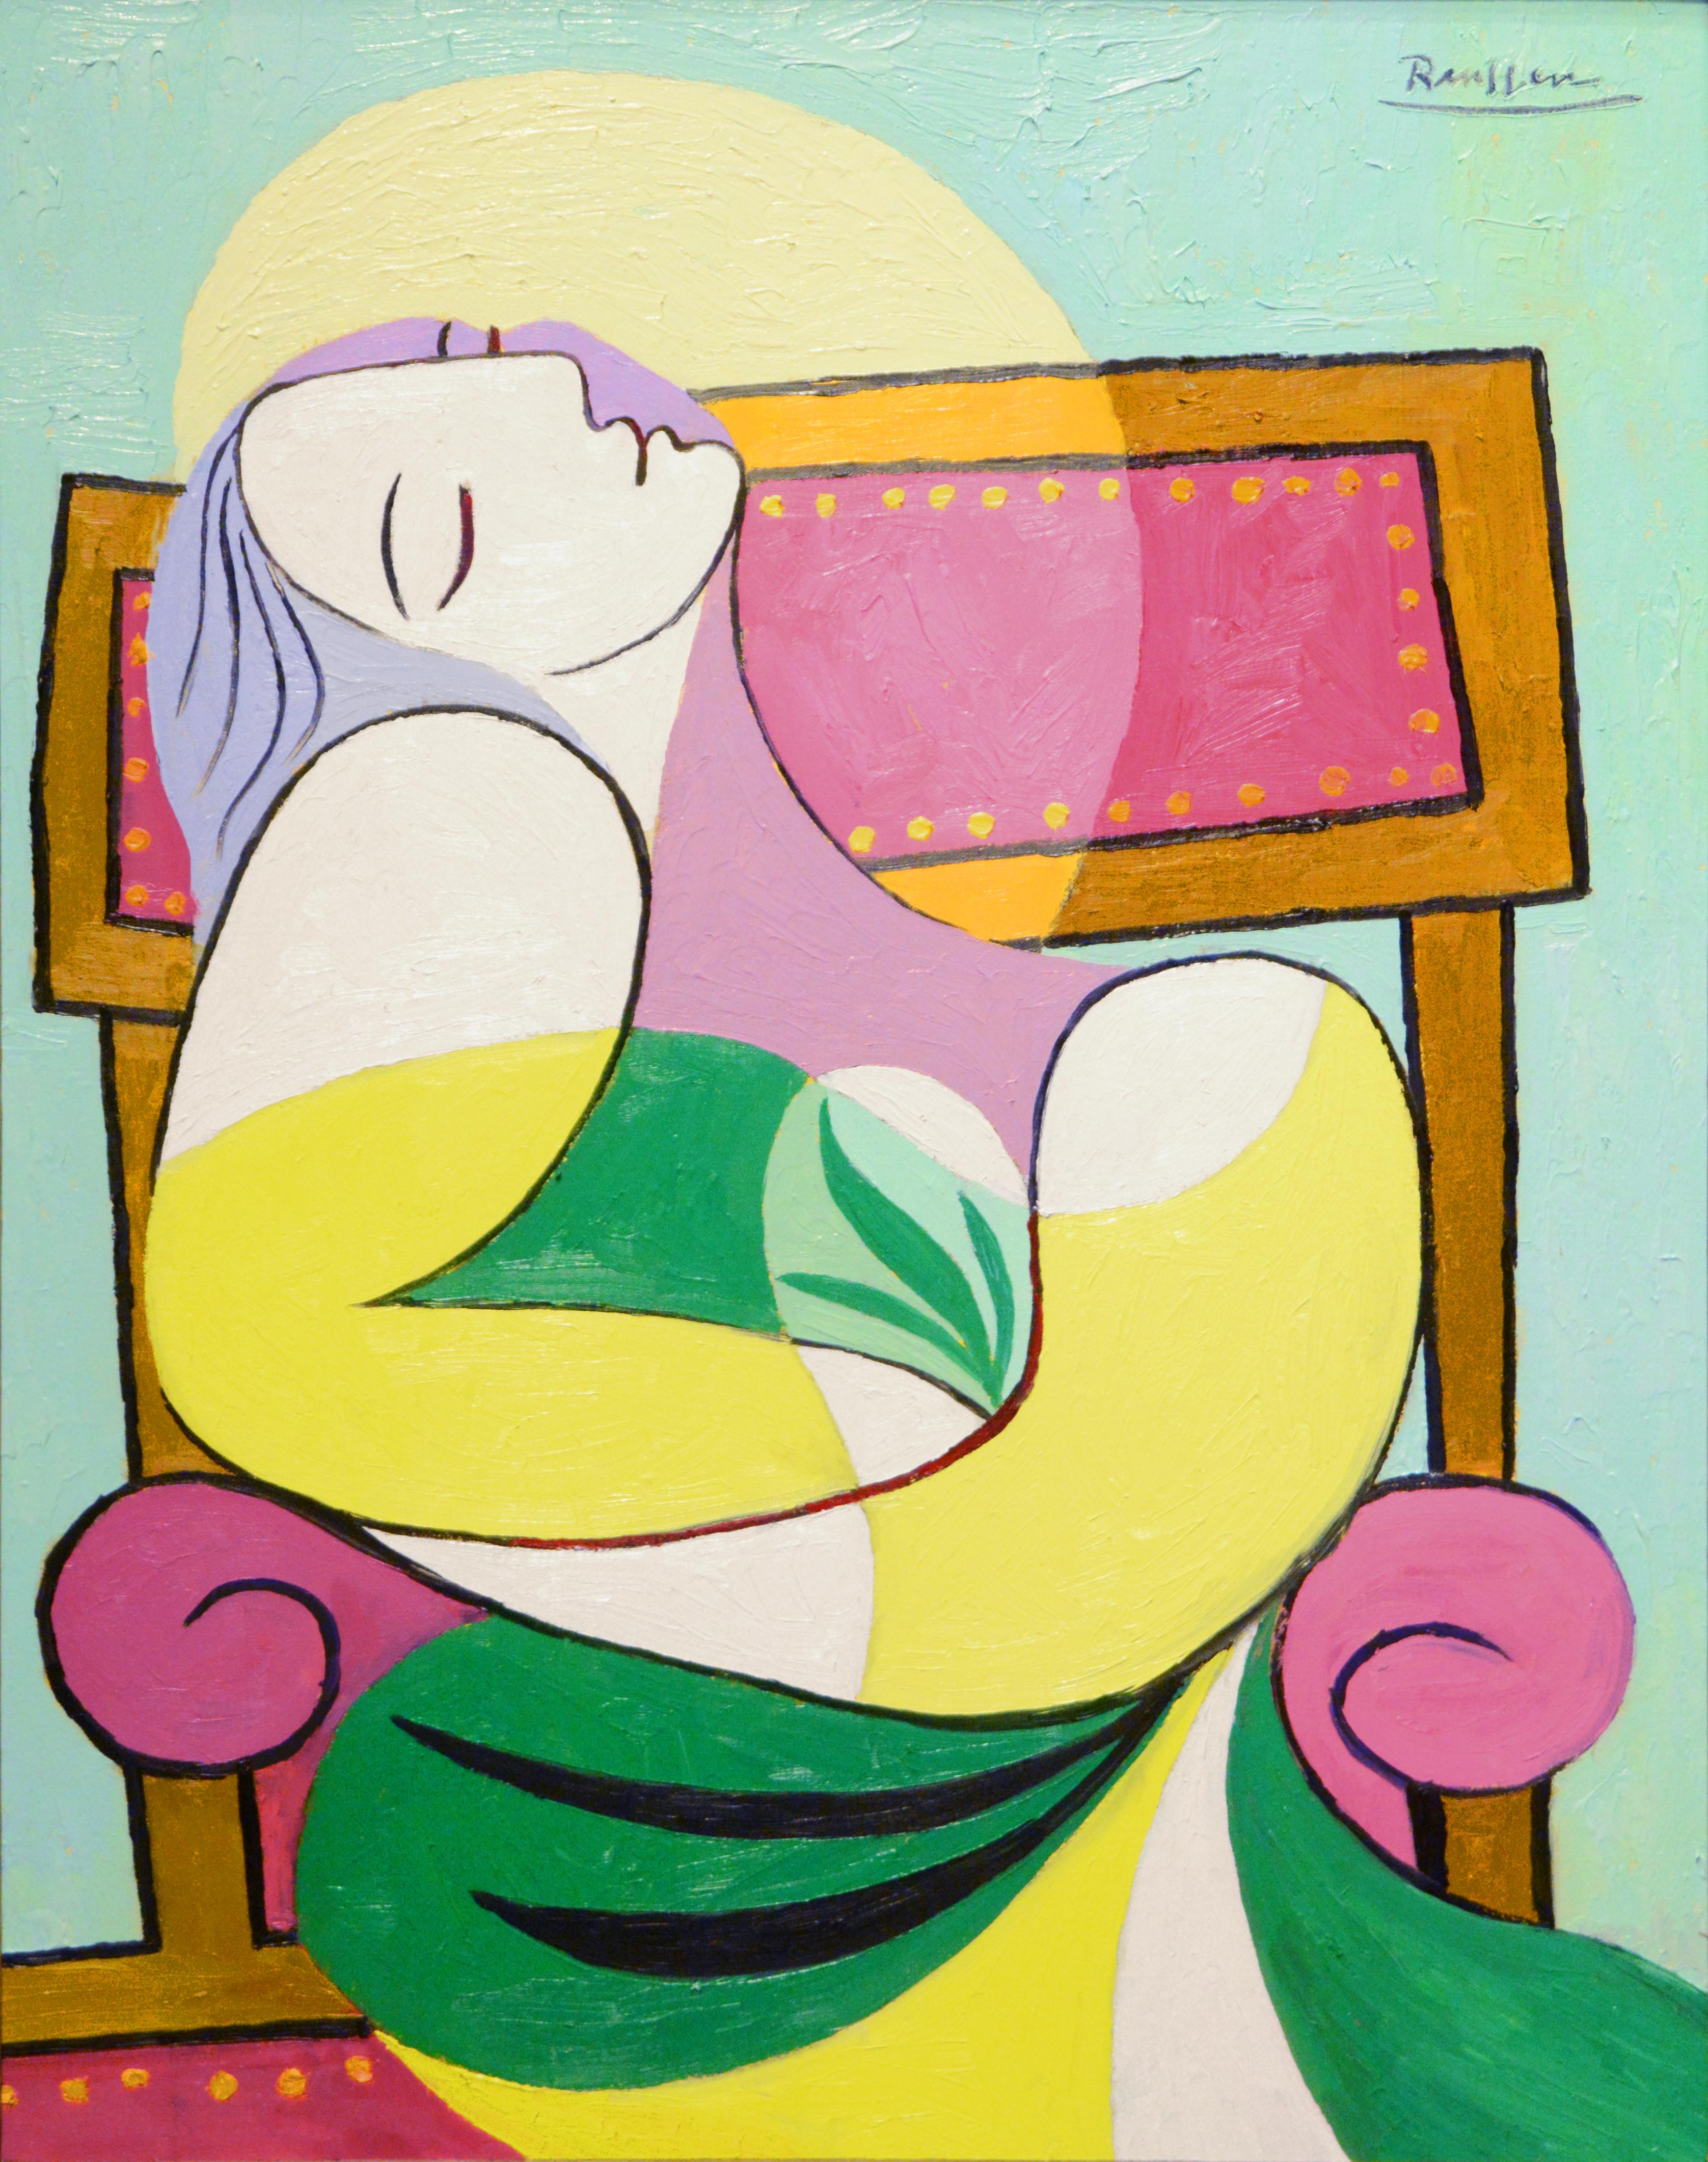 Erik Renssen Figurative Painting - Picasso Inspired Cubist Seated Woman in Green and Yellow Dress